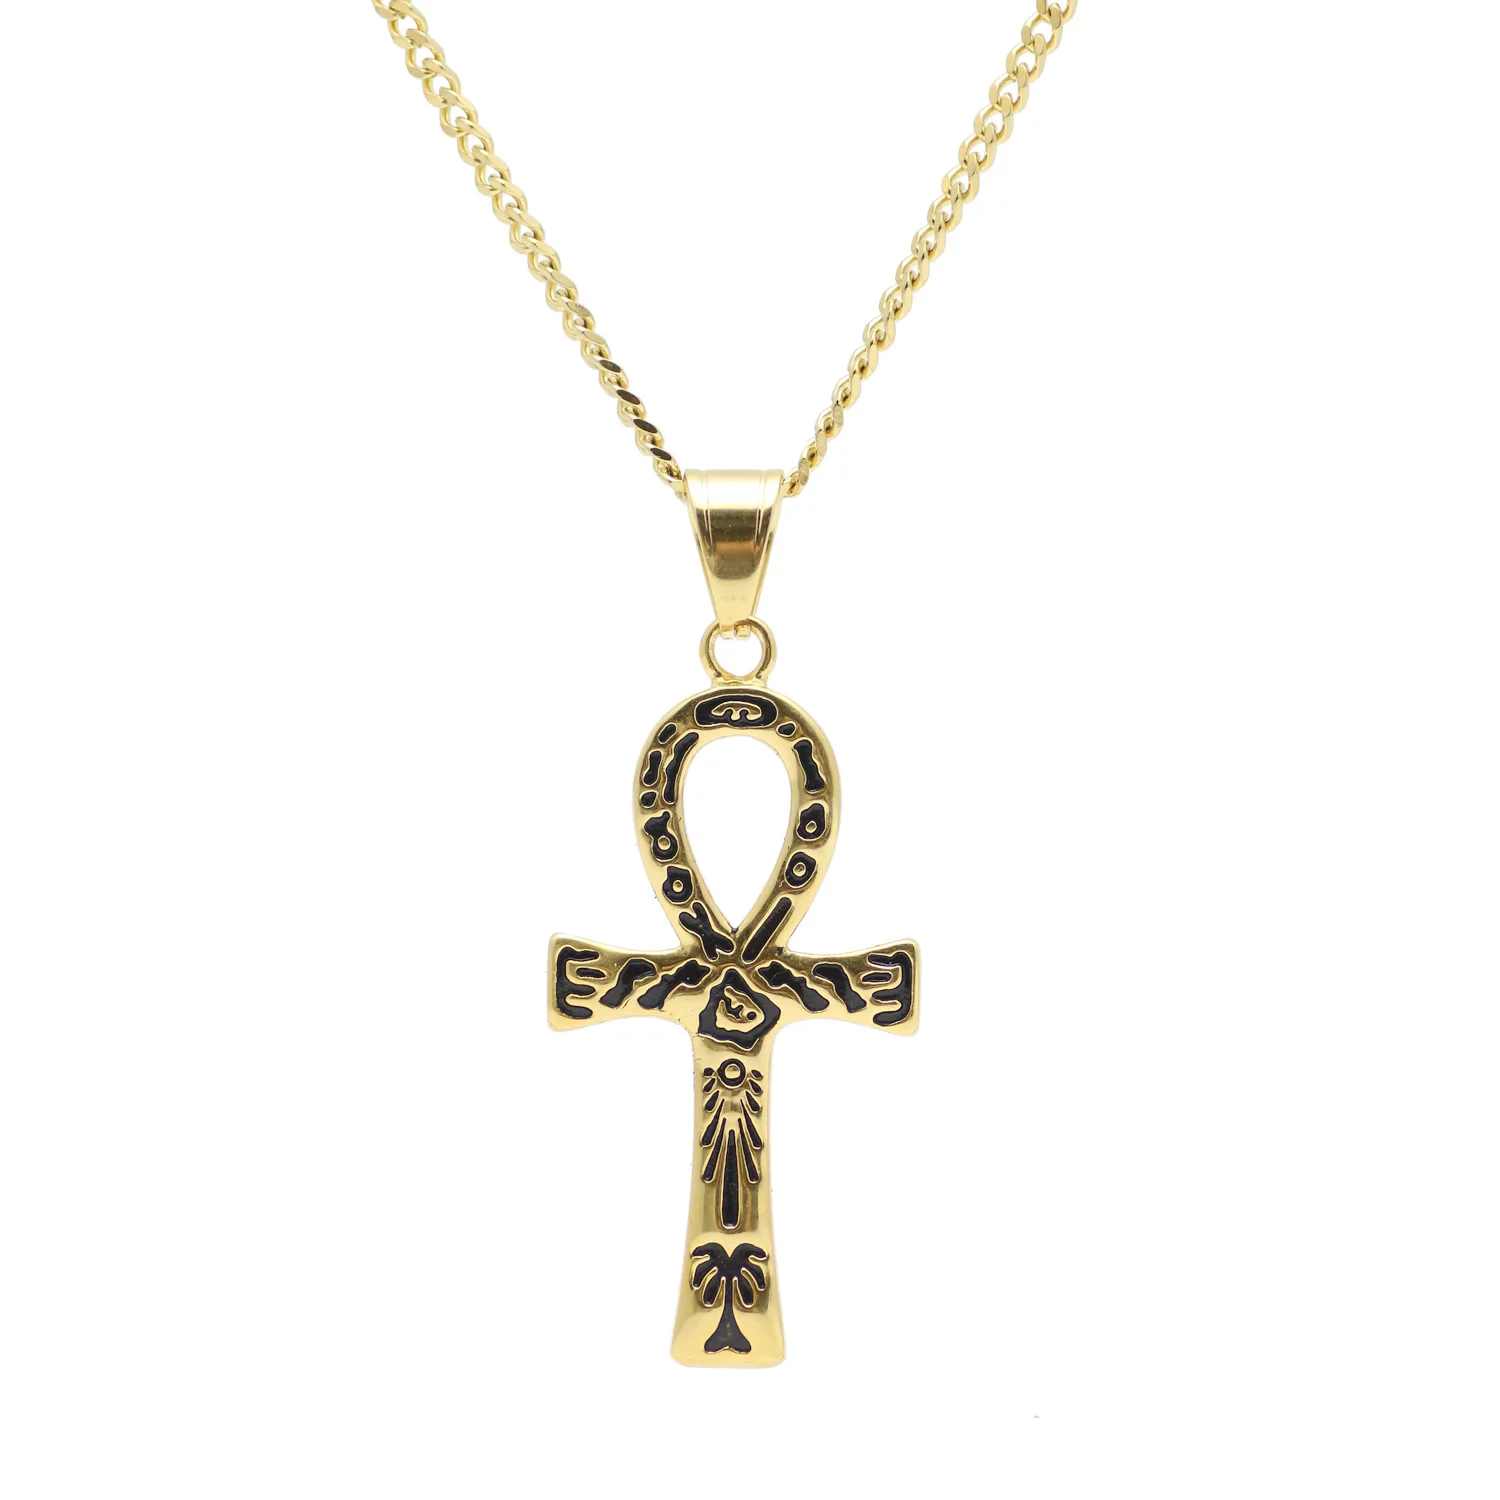 

New Style Ankh Cross Pendant Stainless Steel Material Egyptian Key of Life Pendant Necklace Men Women Religious HipHop Jewelry